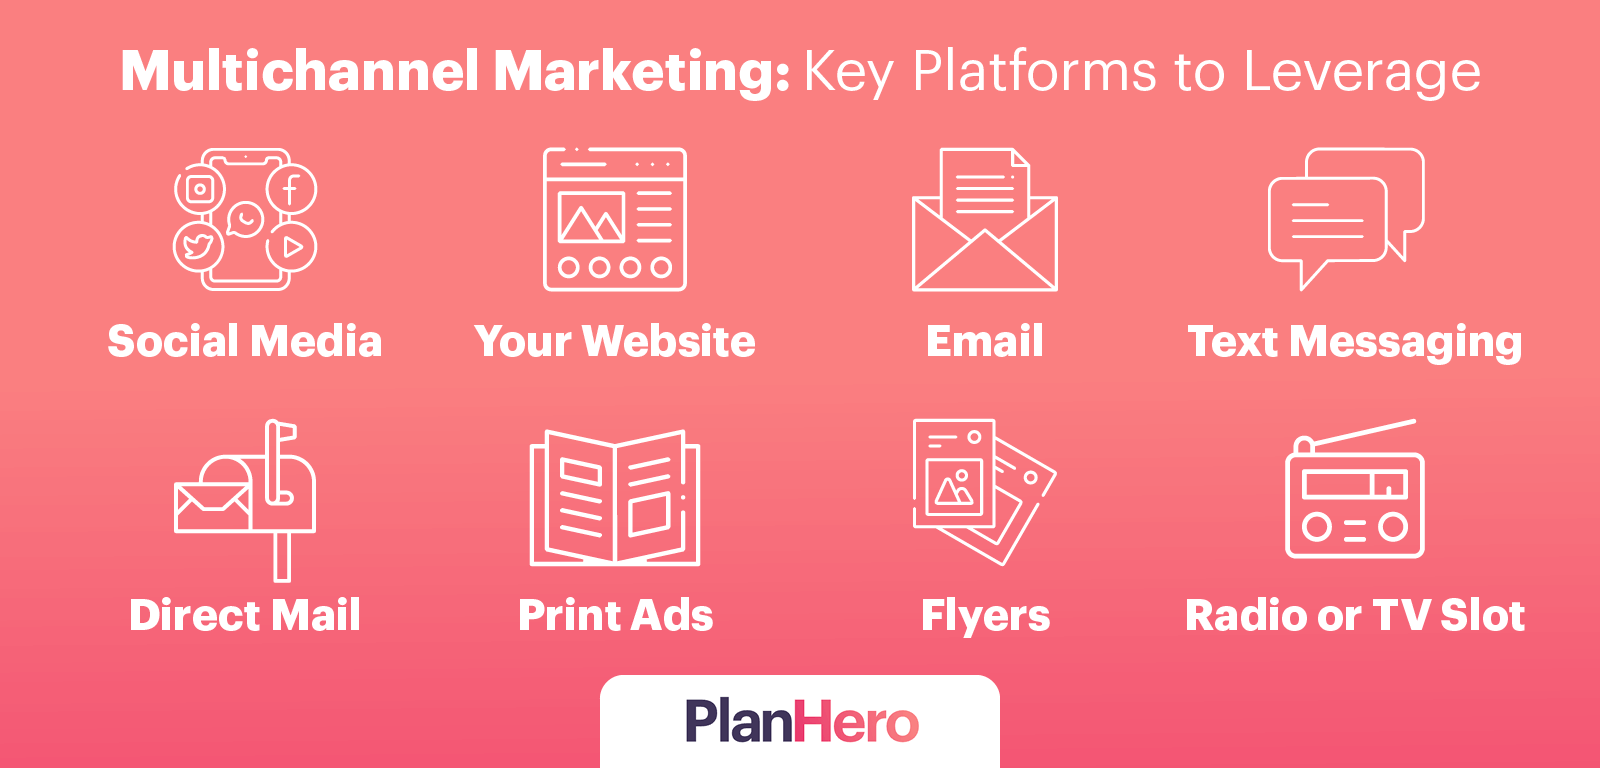 A list of key platforms to leverage in a multichannel marketing strategy